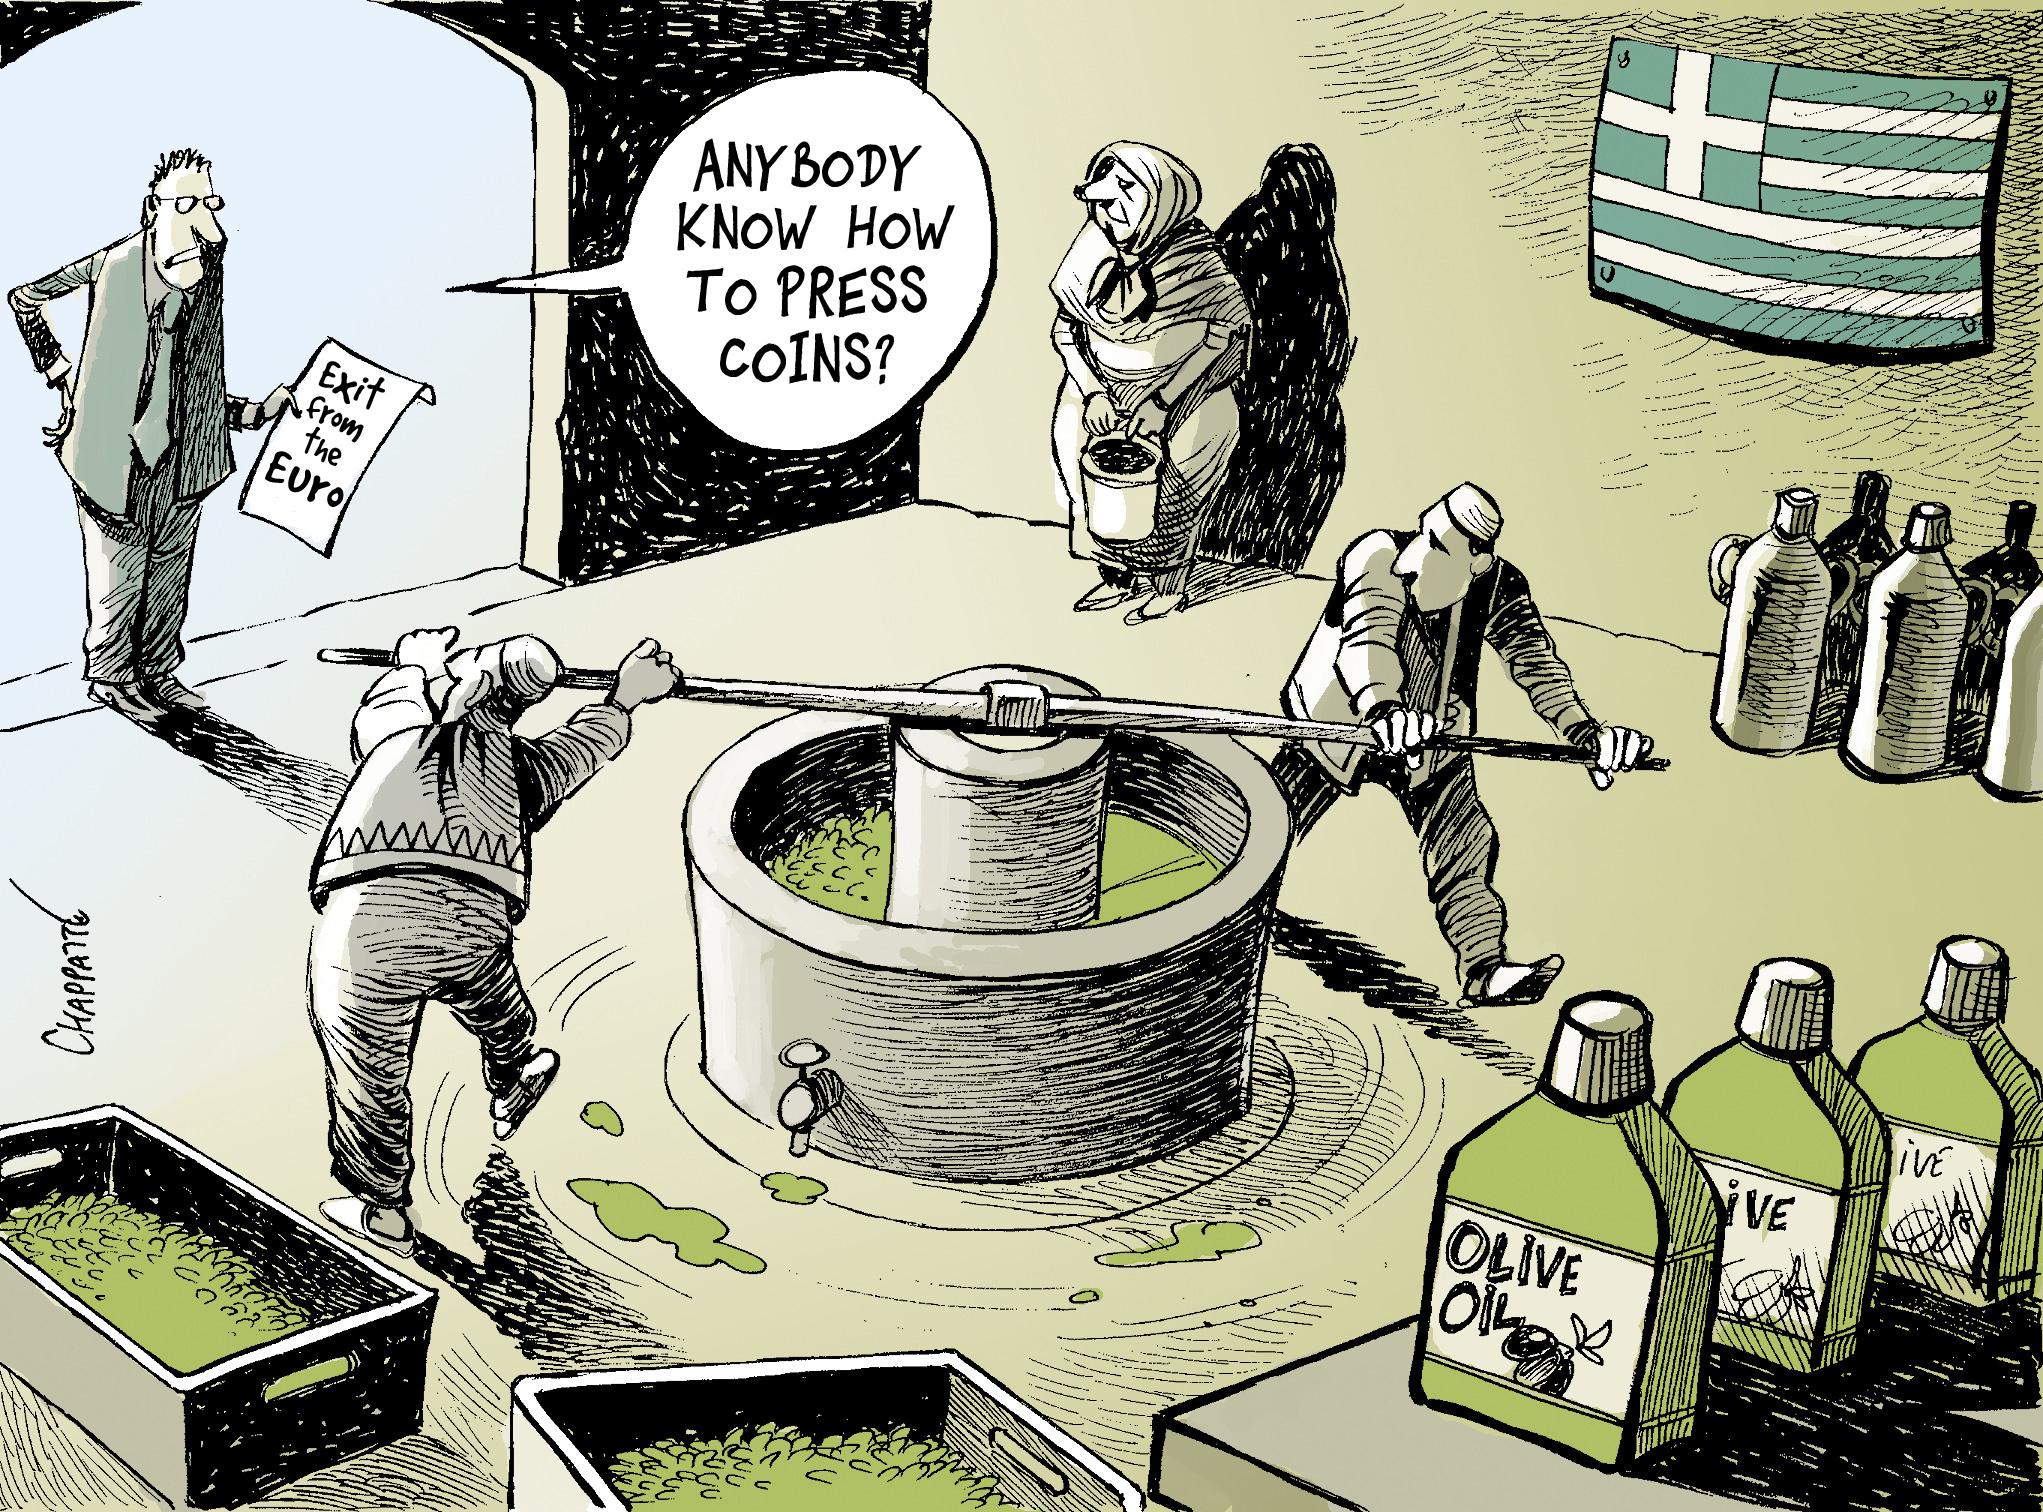 Will Greece get out of the Euro?